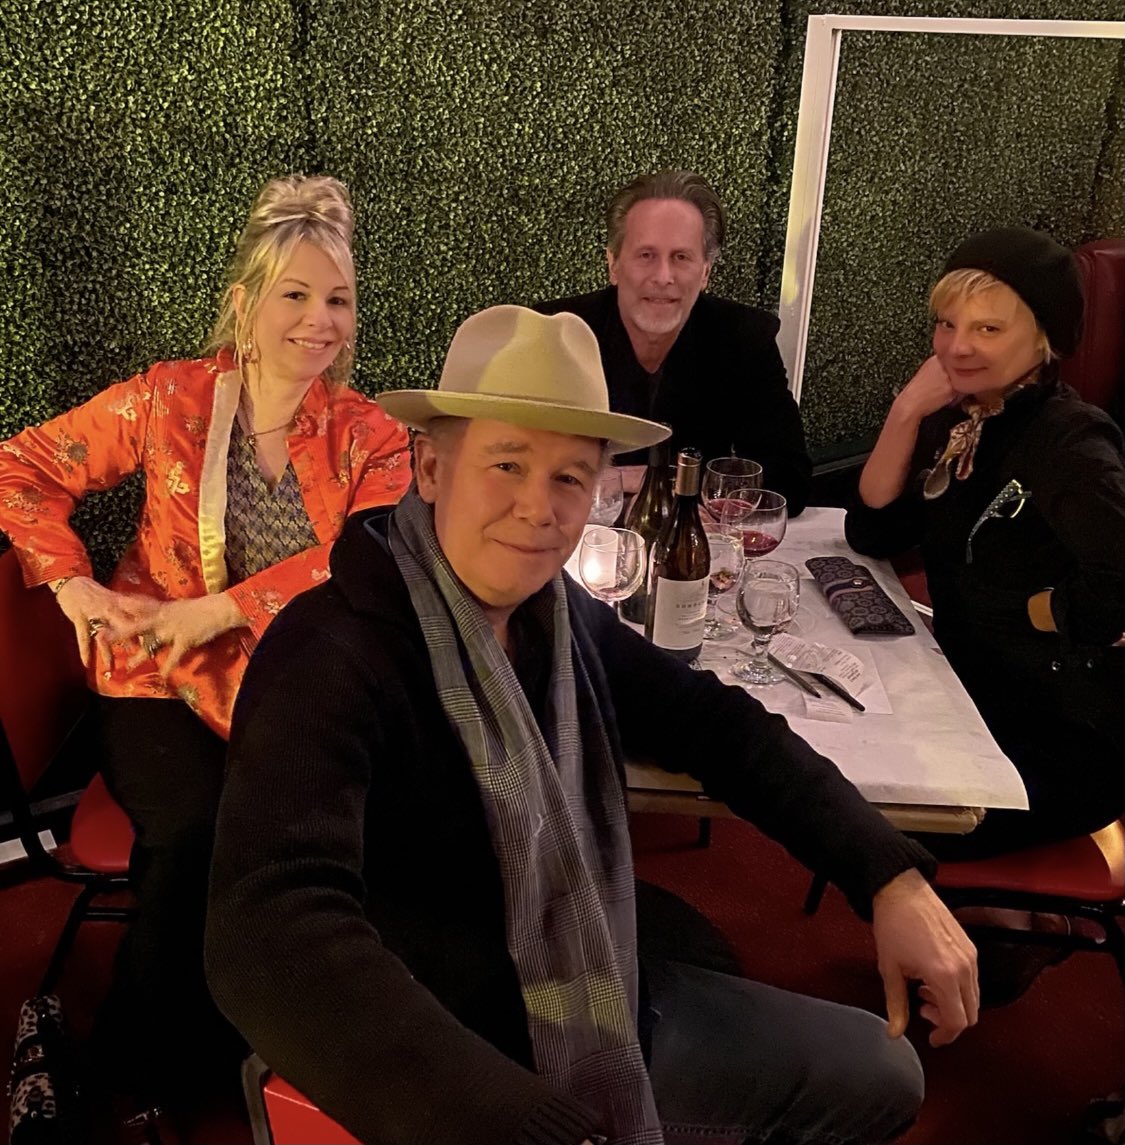 Nothing could keep me away from this crew or my favorite restaurant #MarthaPlimpton, @1SpencerGarrett & #StevenWeber at #DanTanas. We’re actually sitting in an encased plexiglass pod in a driveway towards the back alley, and yet there’s no place else I’d rather be.